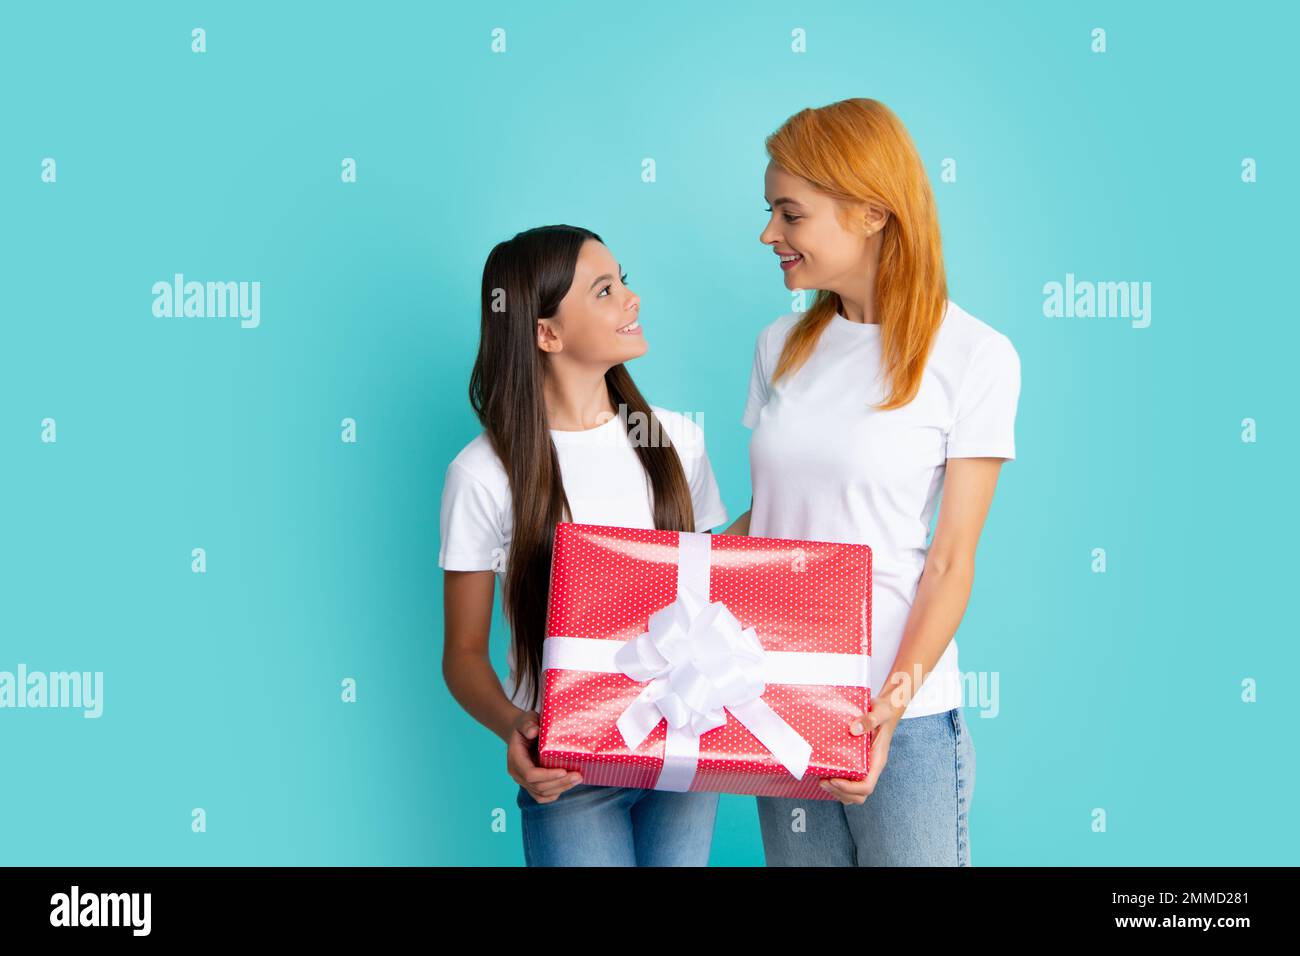 Love mom. Smiling mother and daughter with gift box. Mothers day. Cheerful mom and her cute daughter girl with gifts. Stock Photo